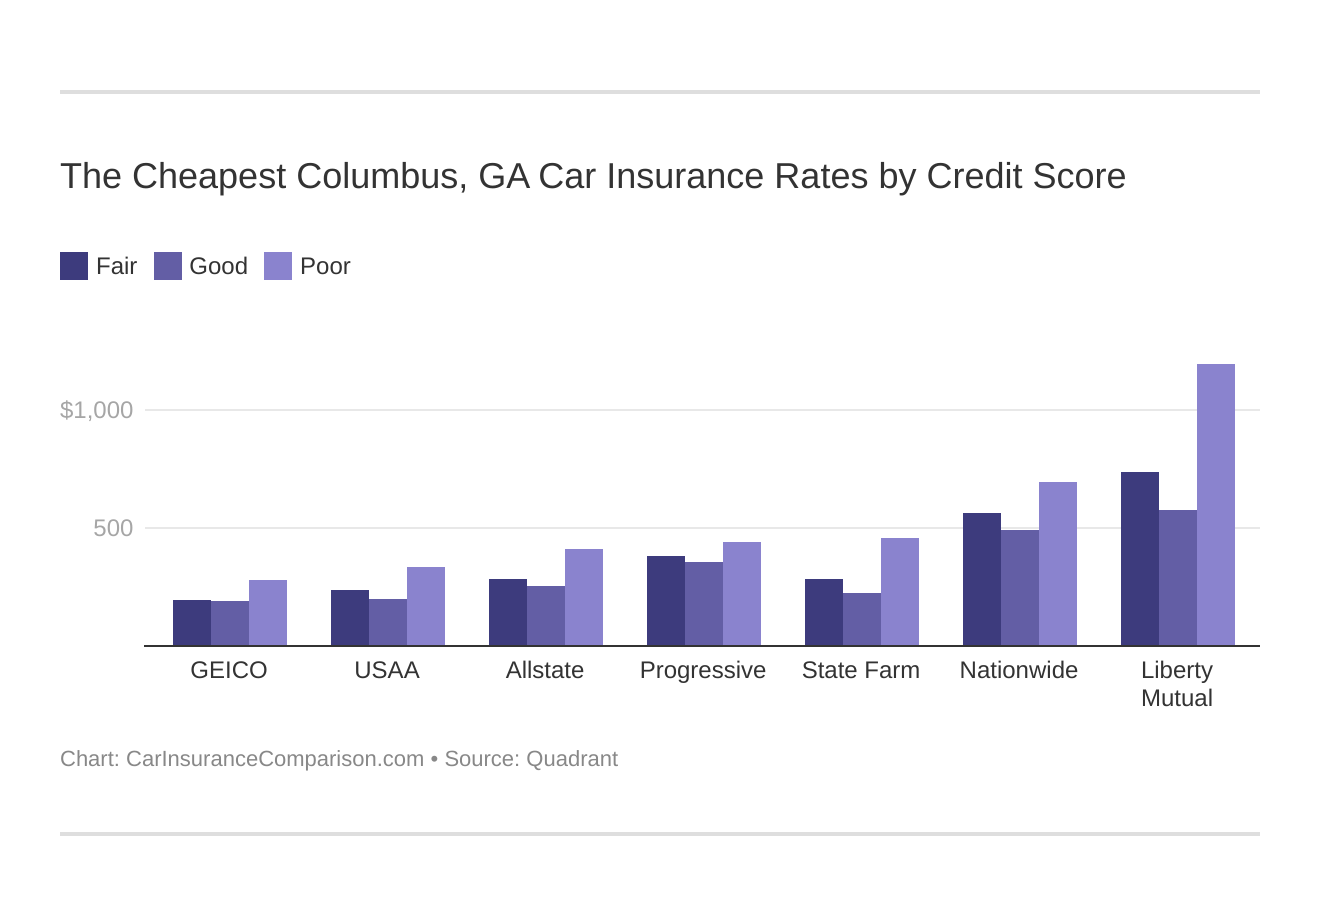 The Cheapest Columbus, GA Car Insurance Rates by Credit Score